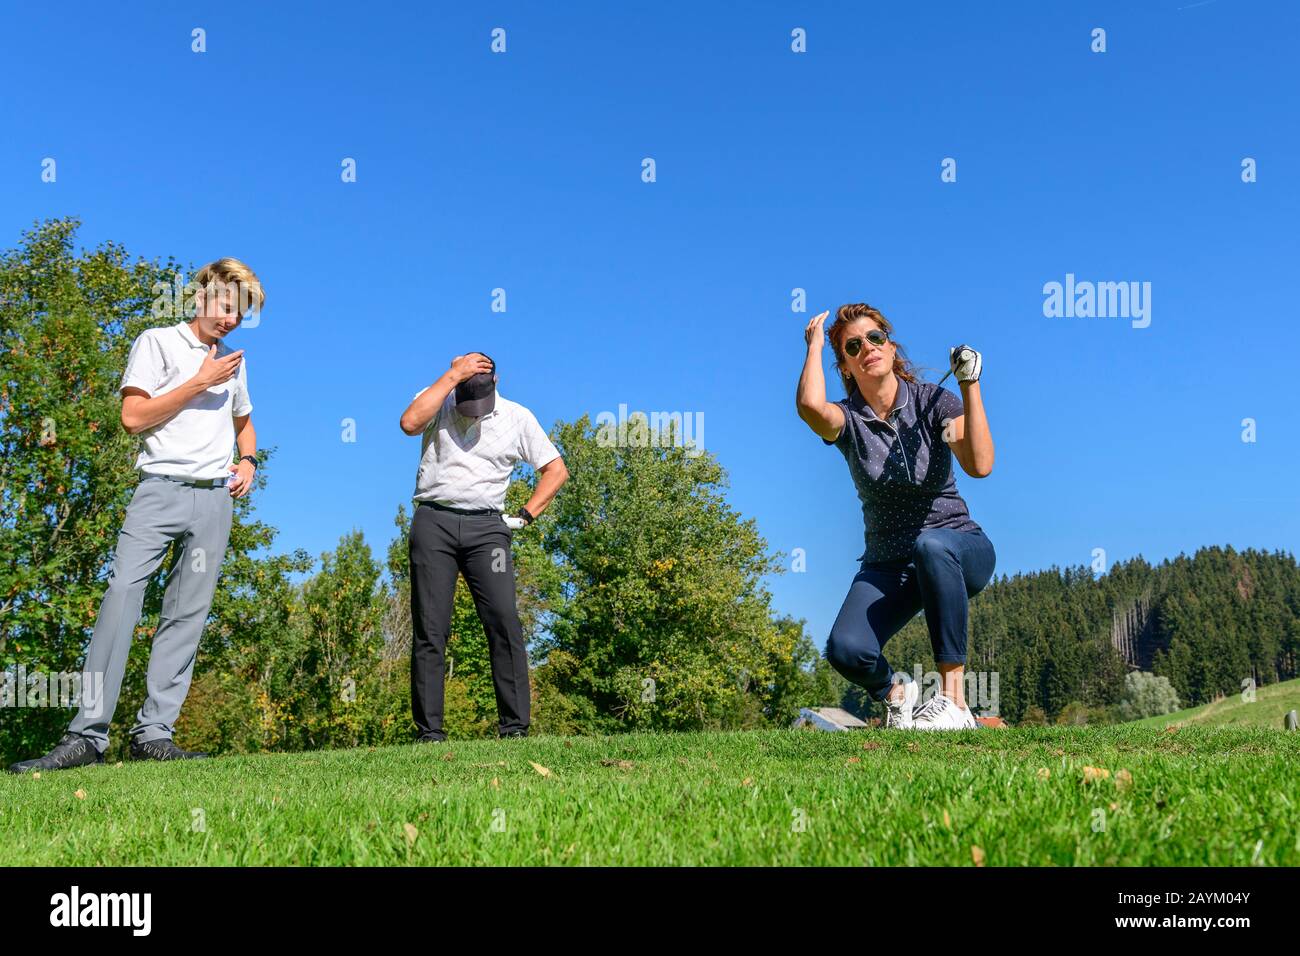 Feamle golf player is grieved about mishit from tee Stock Photo